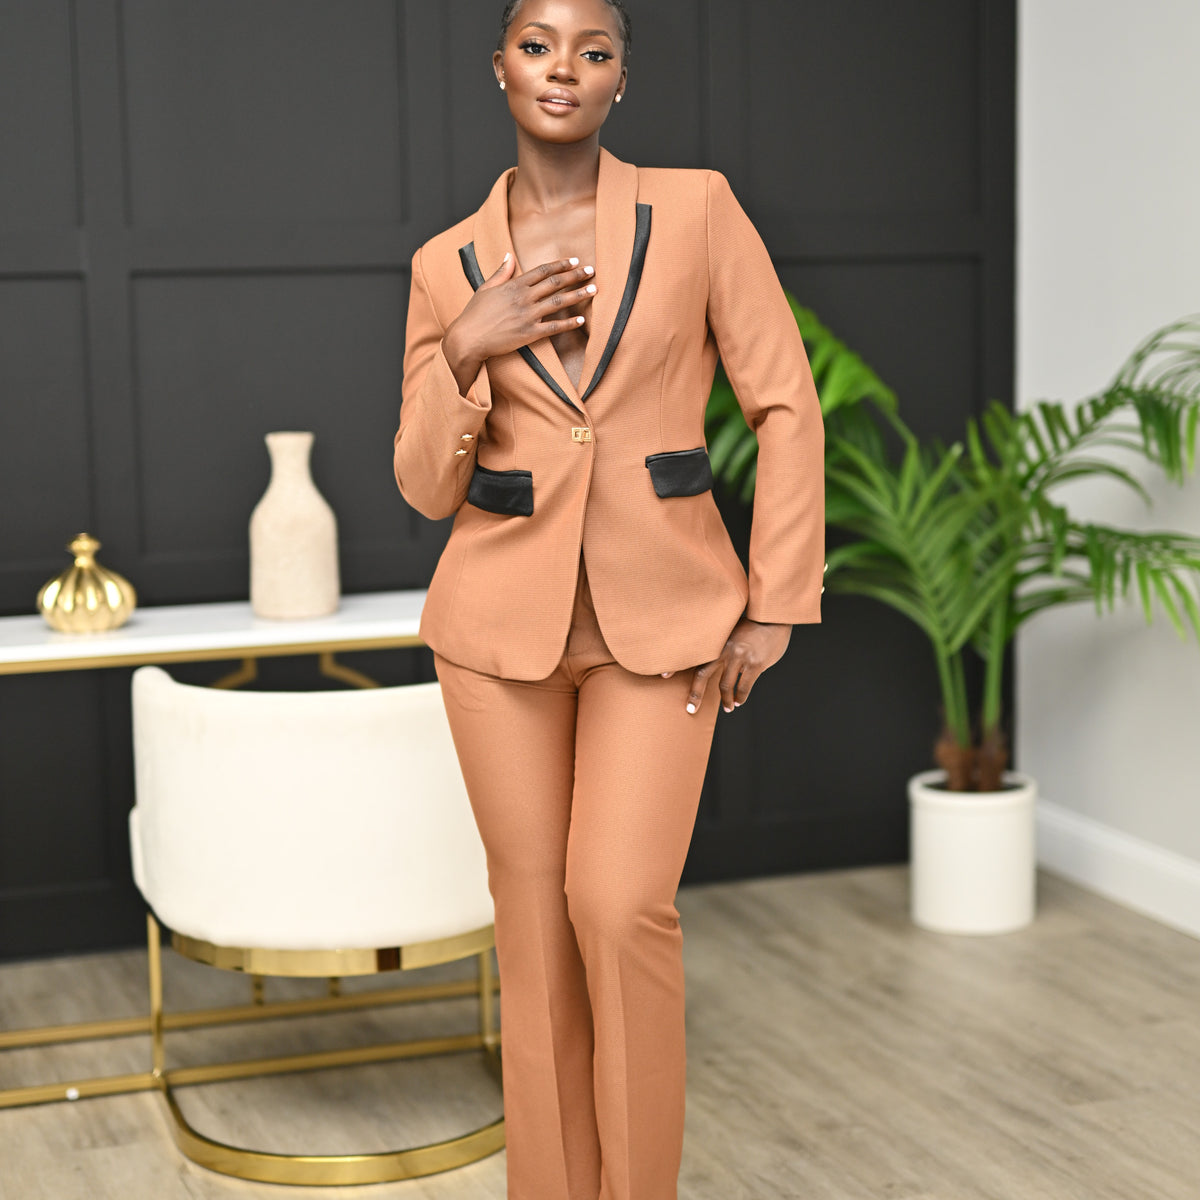 Best suits for women - for a confident empowered look - 40+style